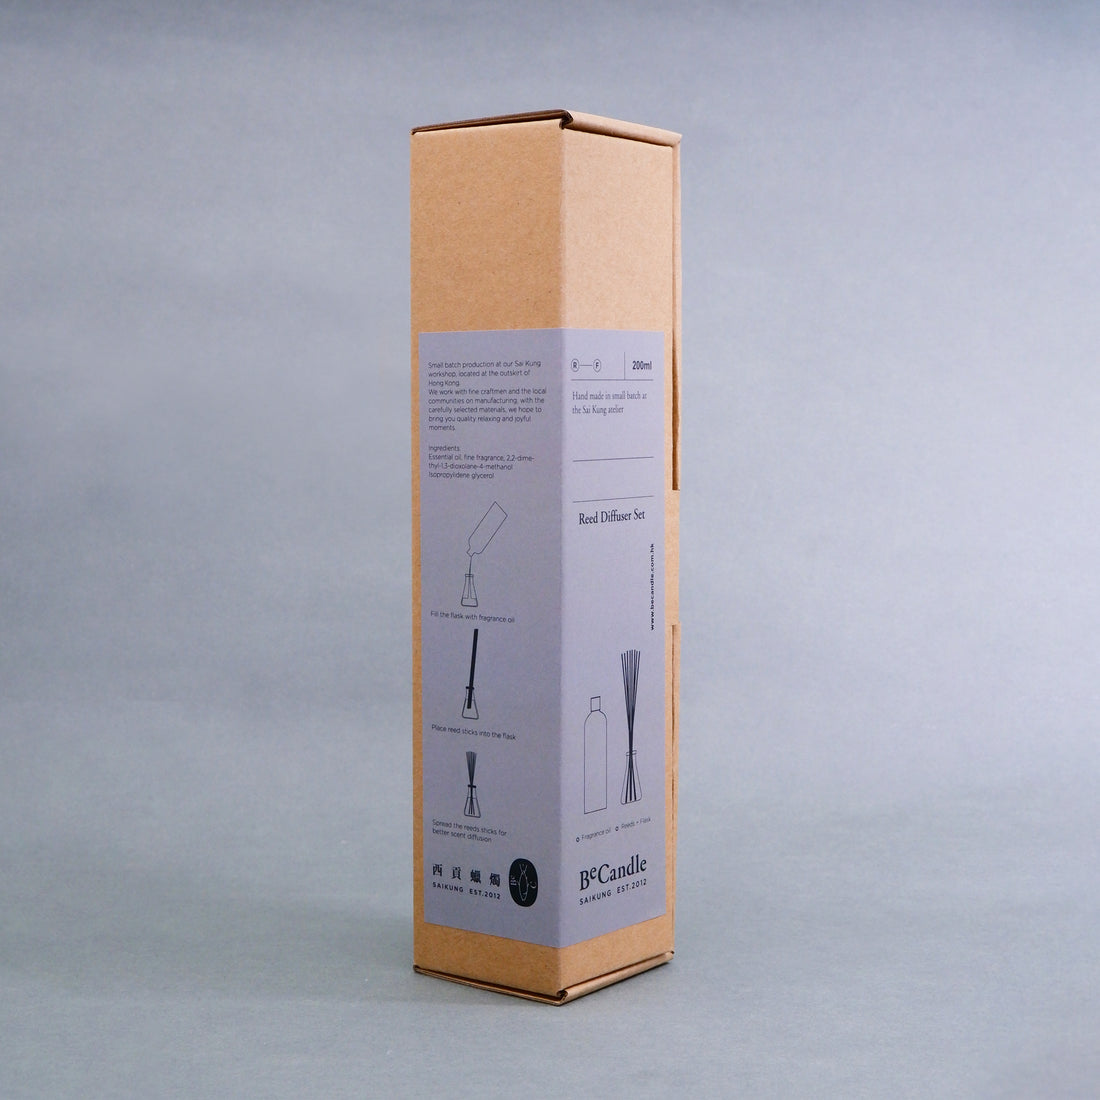 becandle-made-in-sai-kung-reed-diffuser-legno-package